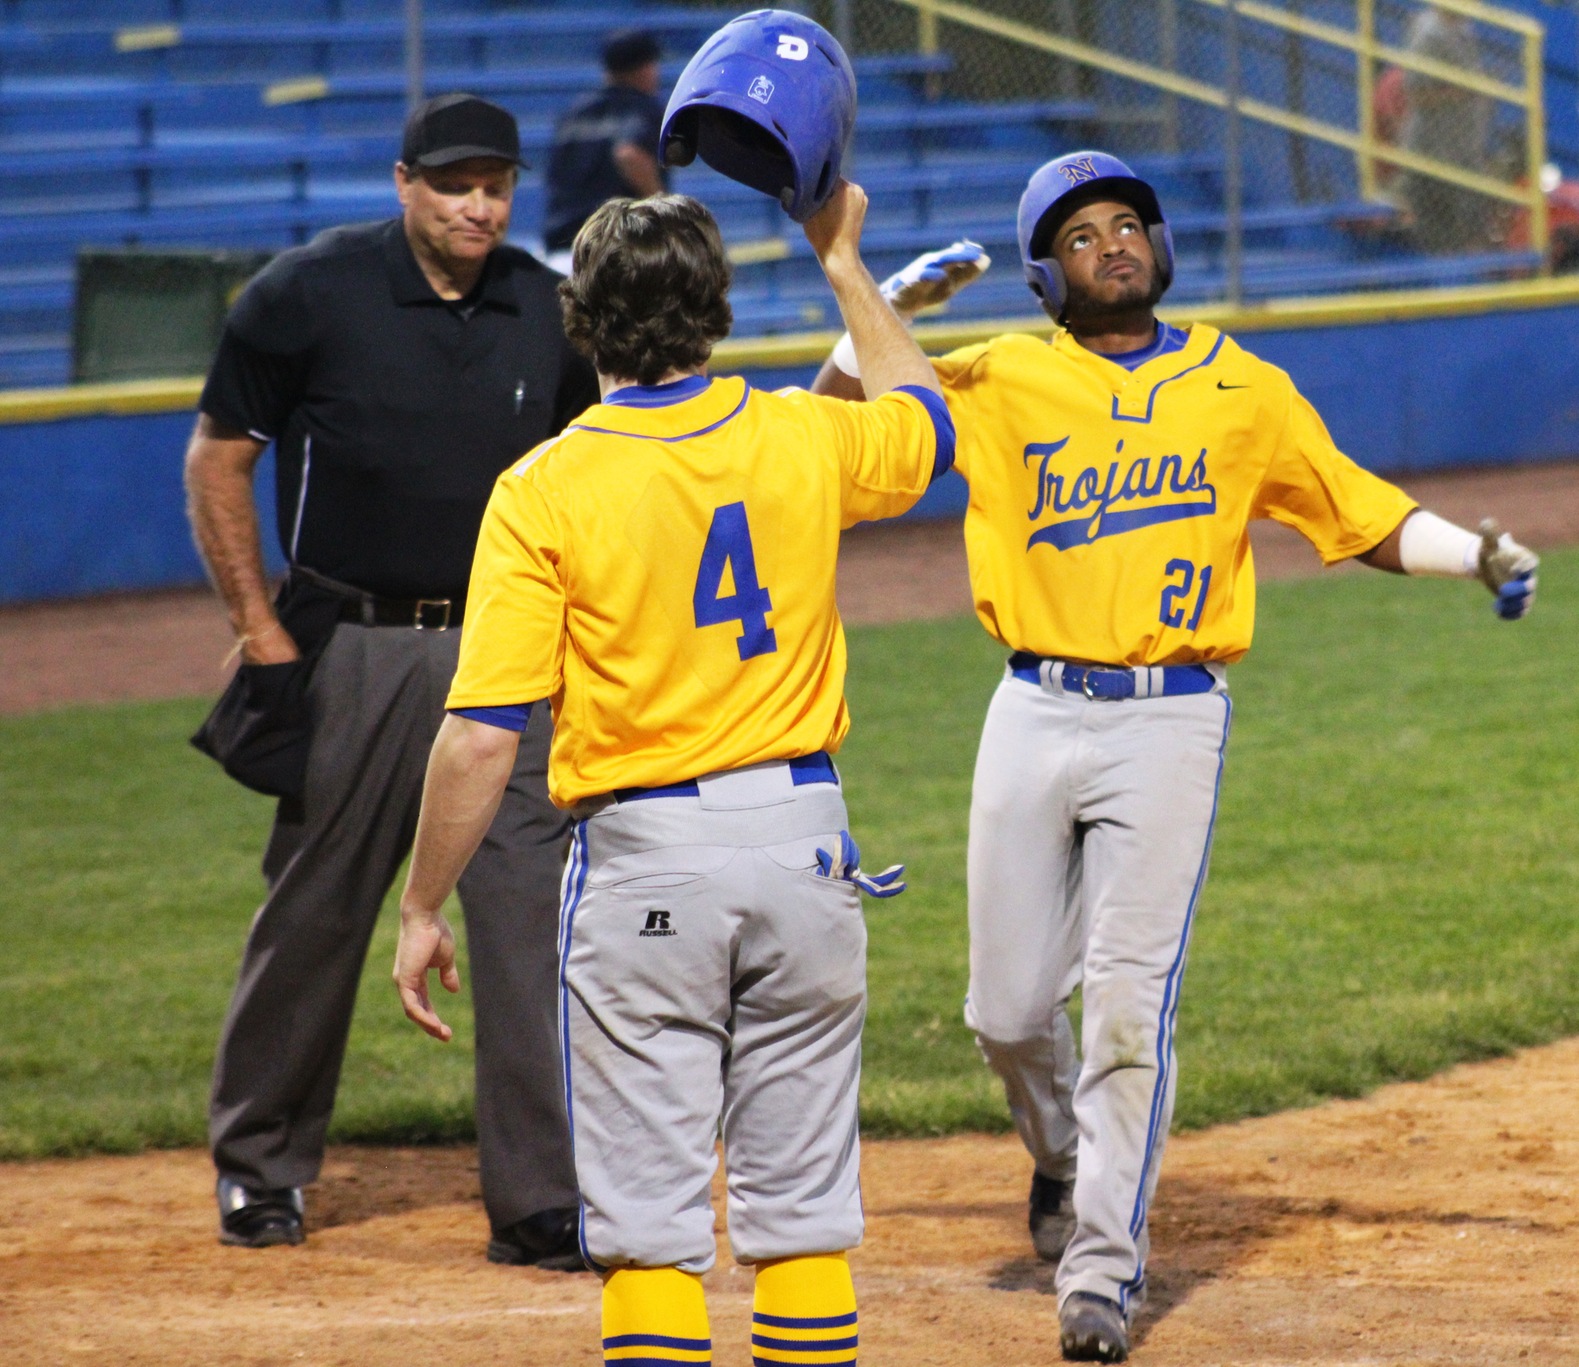 NIACC's Eze Encarnacion approaches home plate after hitting a home run against Iowa Central in the 2017 regional tournament in Waterloo.